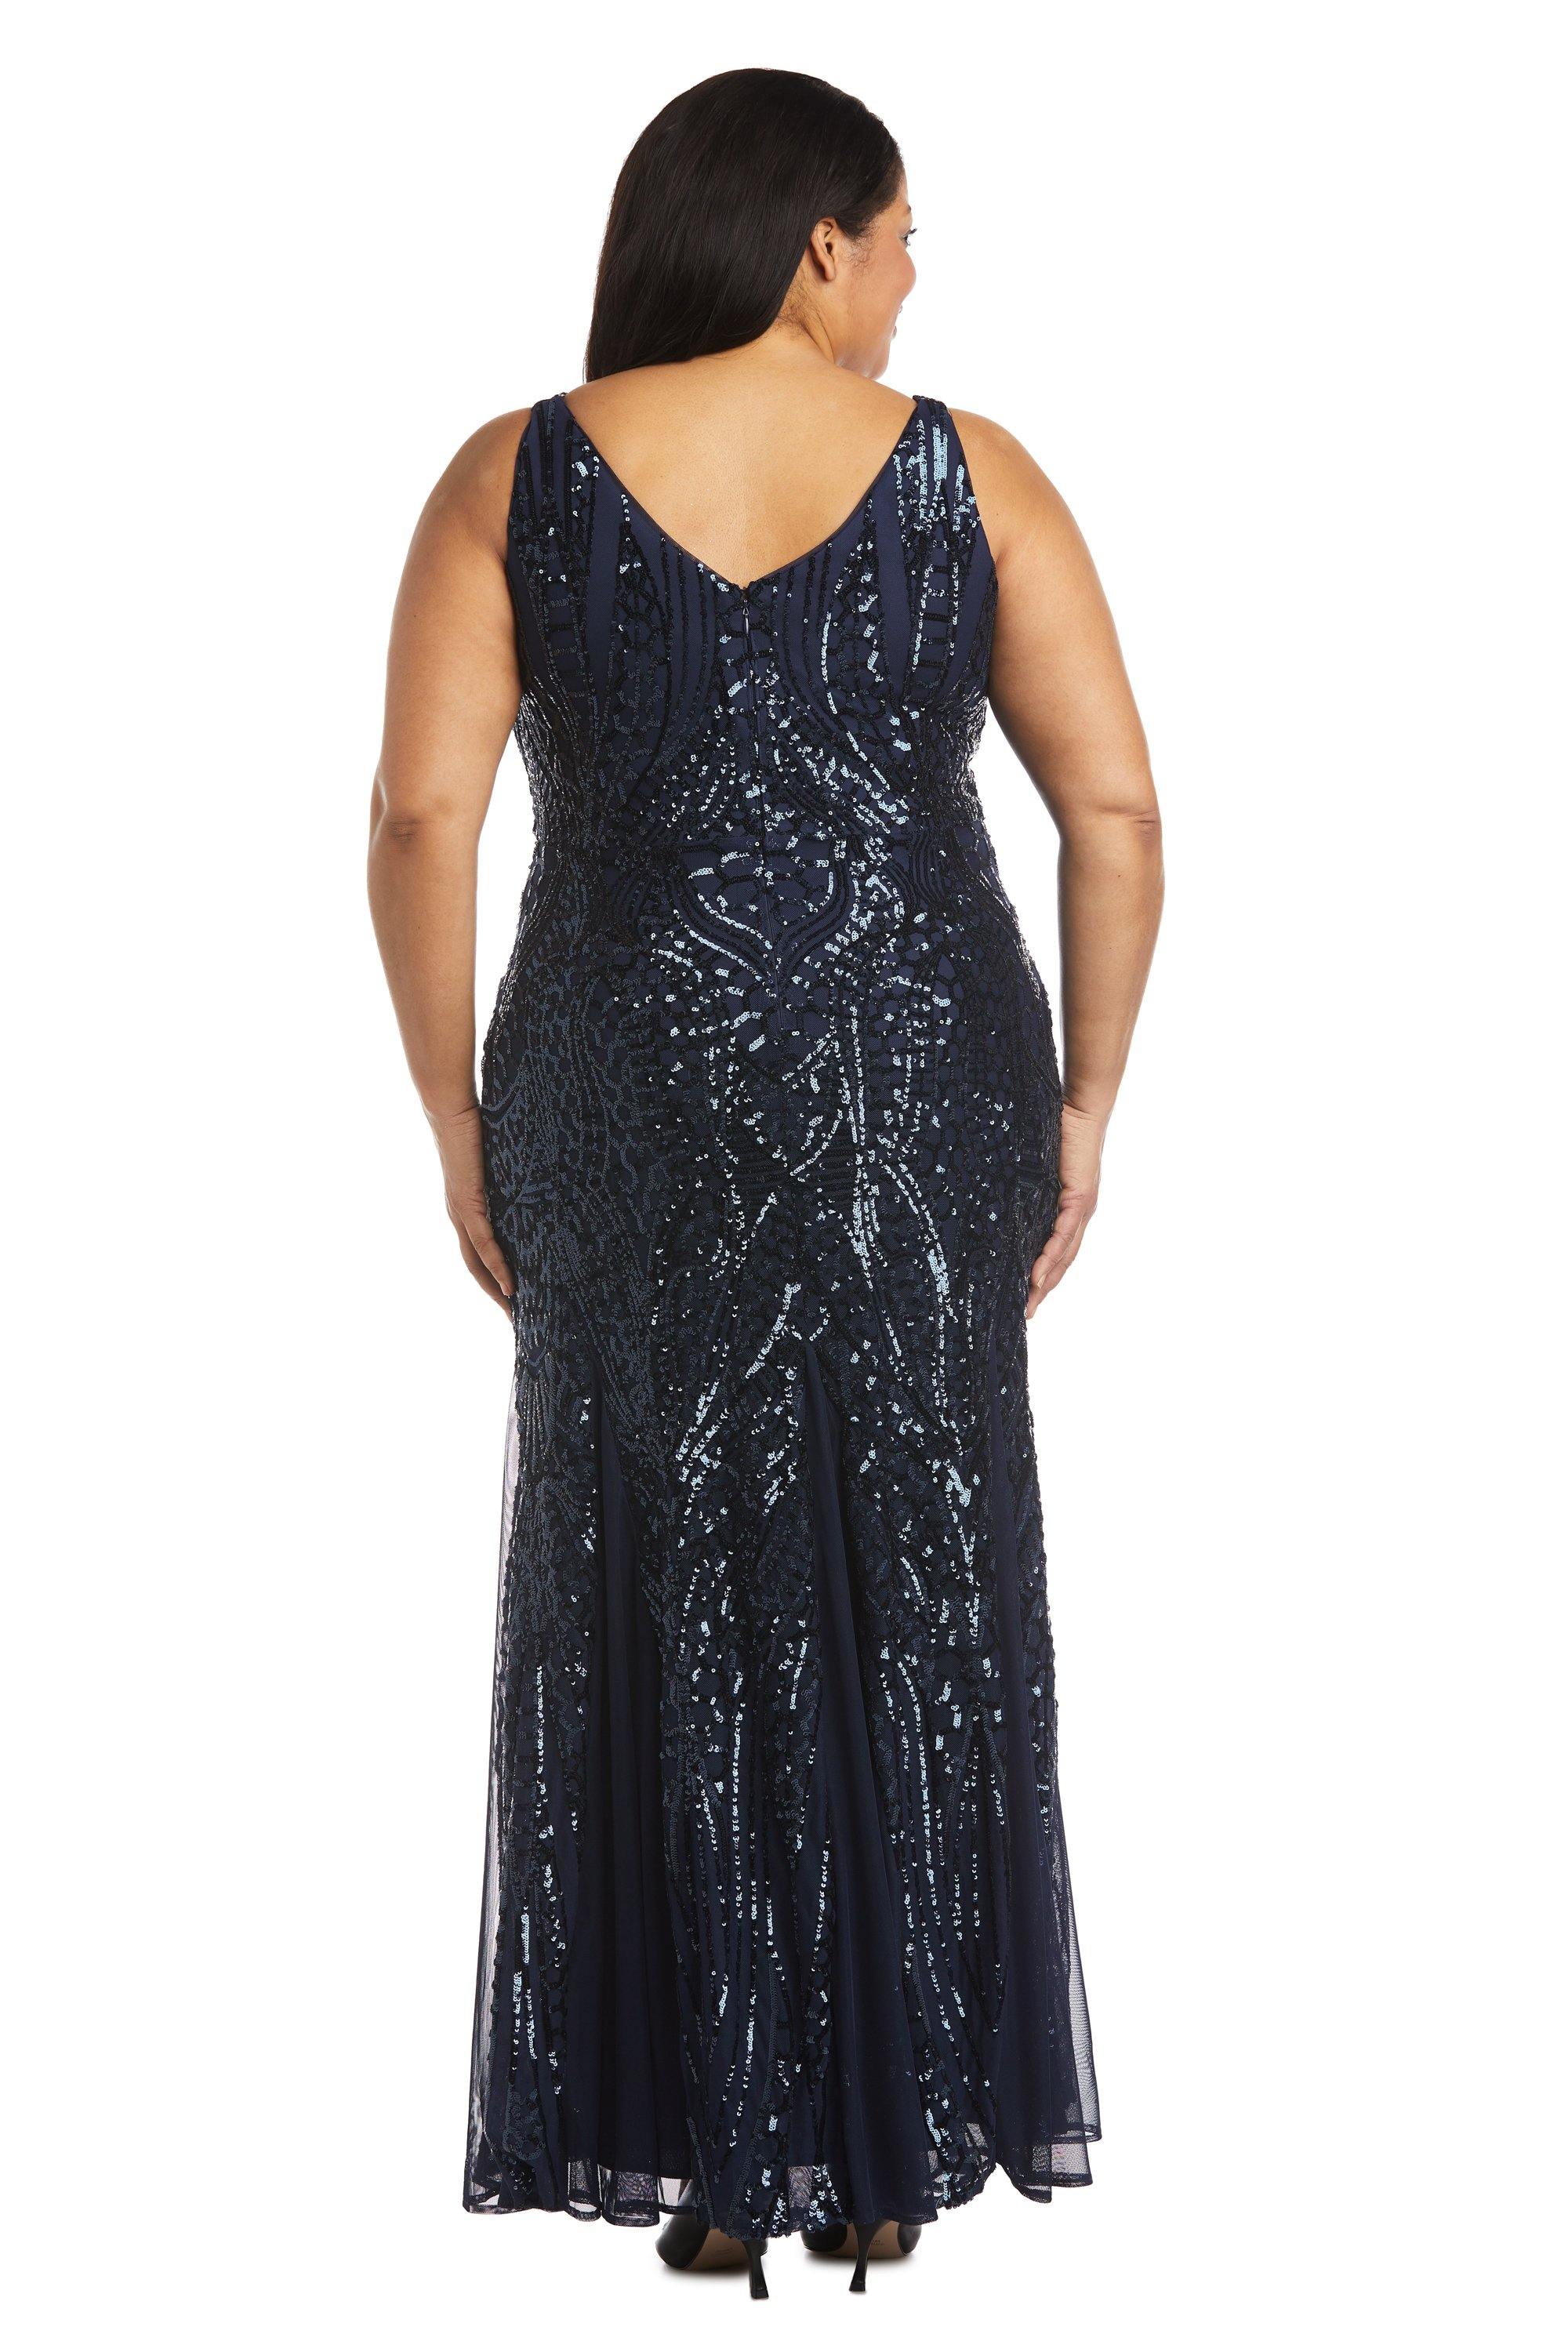 Nightway Long Plus Size Beaded Formal Gown 21685W - The Dress Outlet